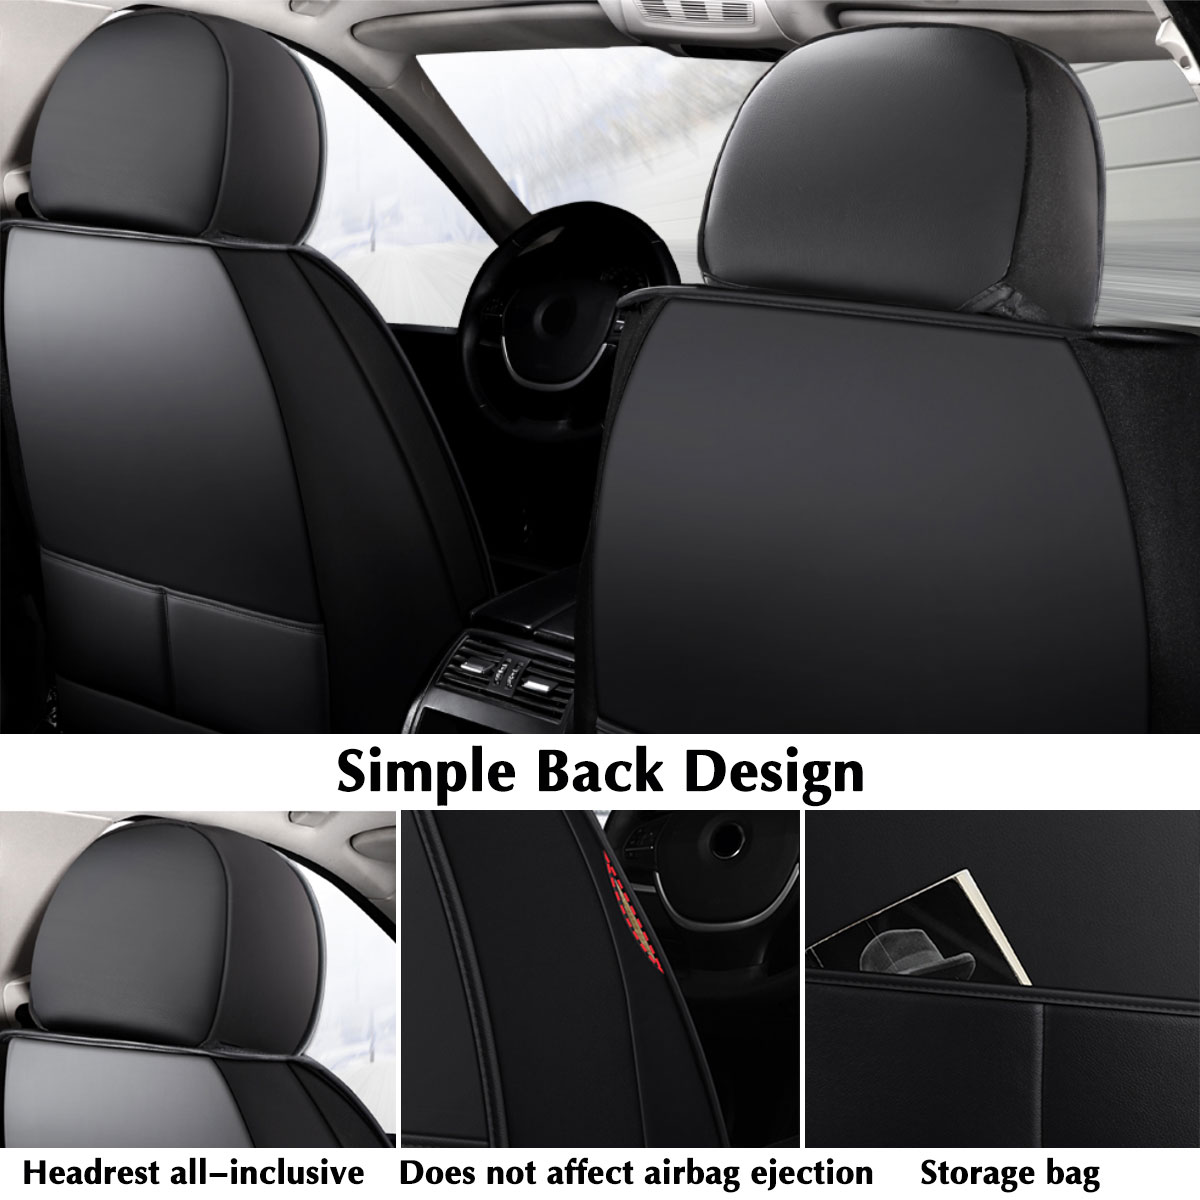 Universal PU Leather Car Auto Front Seat Cushion Pad Cover Protector Mat Black